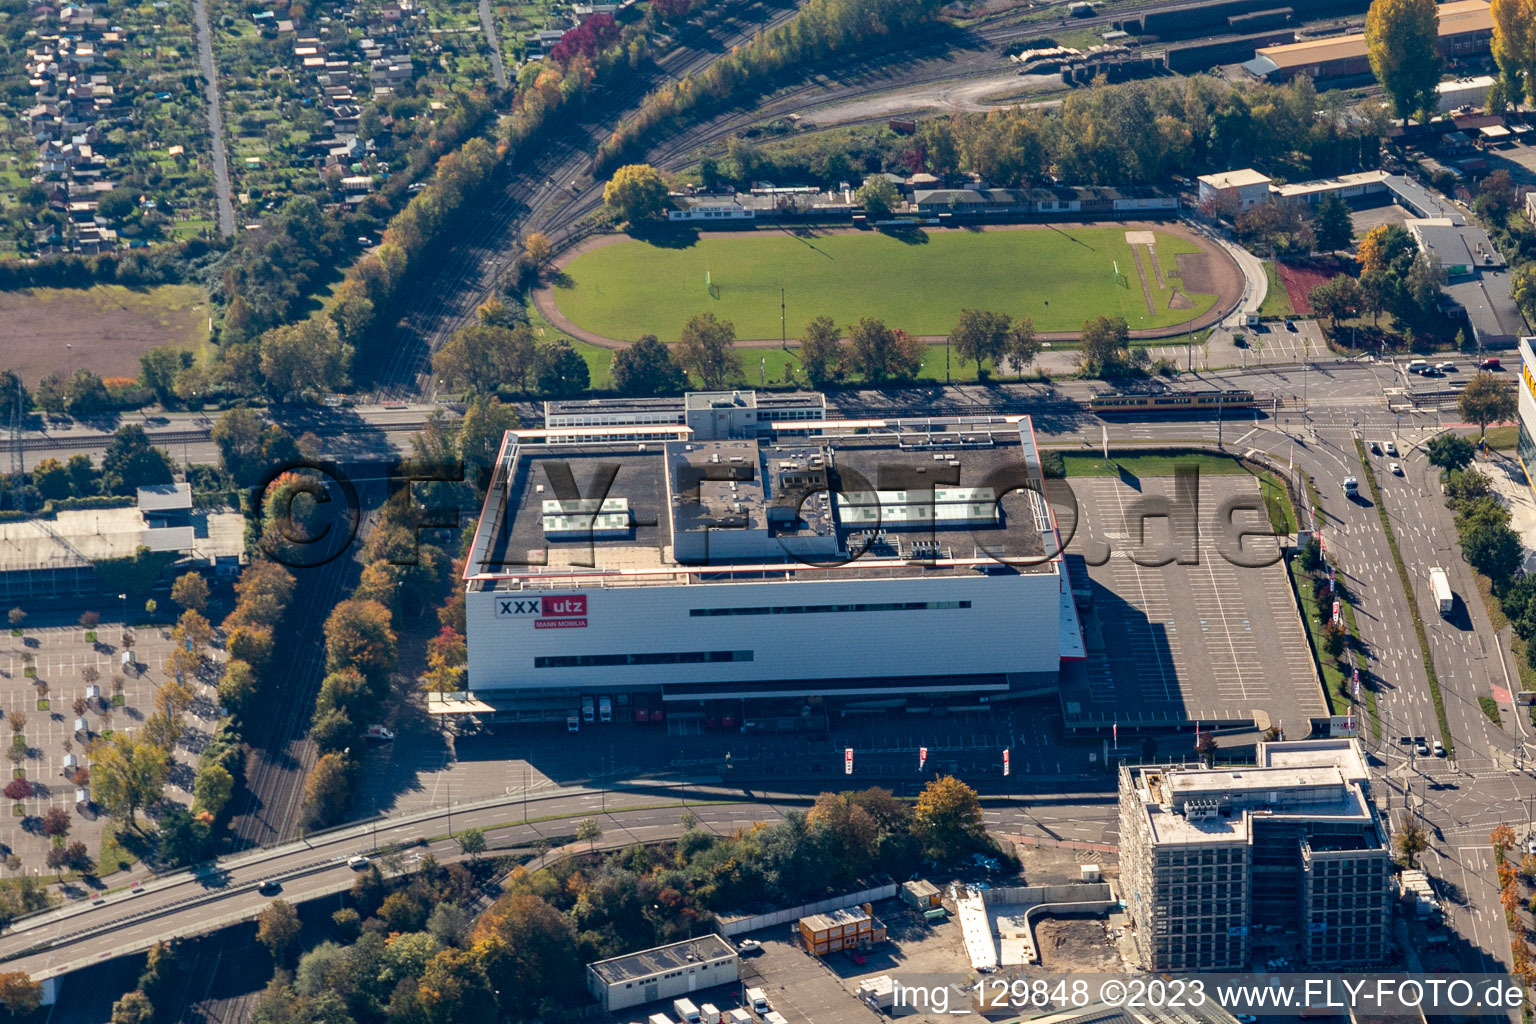 Aerial view of Building of the store - furniture market XXL Lutz, MANN Management GmbH in the district Rintheim in Karlsruhe in the state Baden-Wuerttemberg, Germany